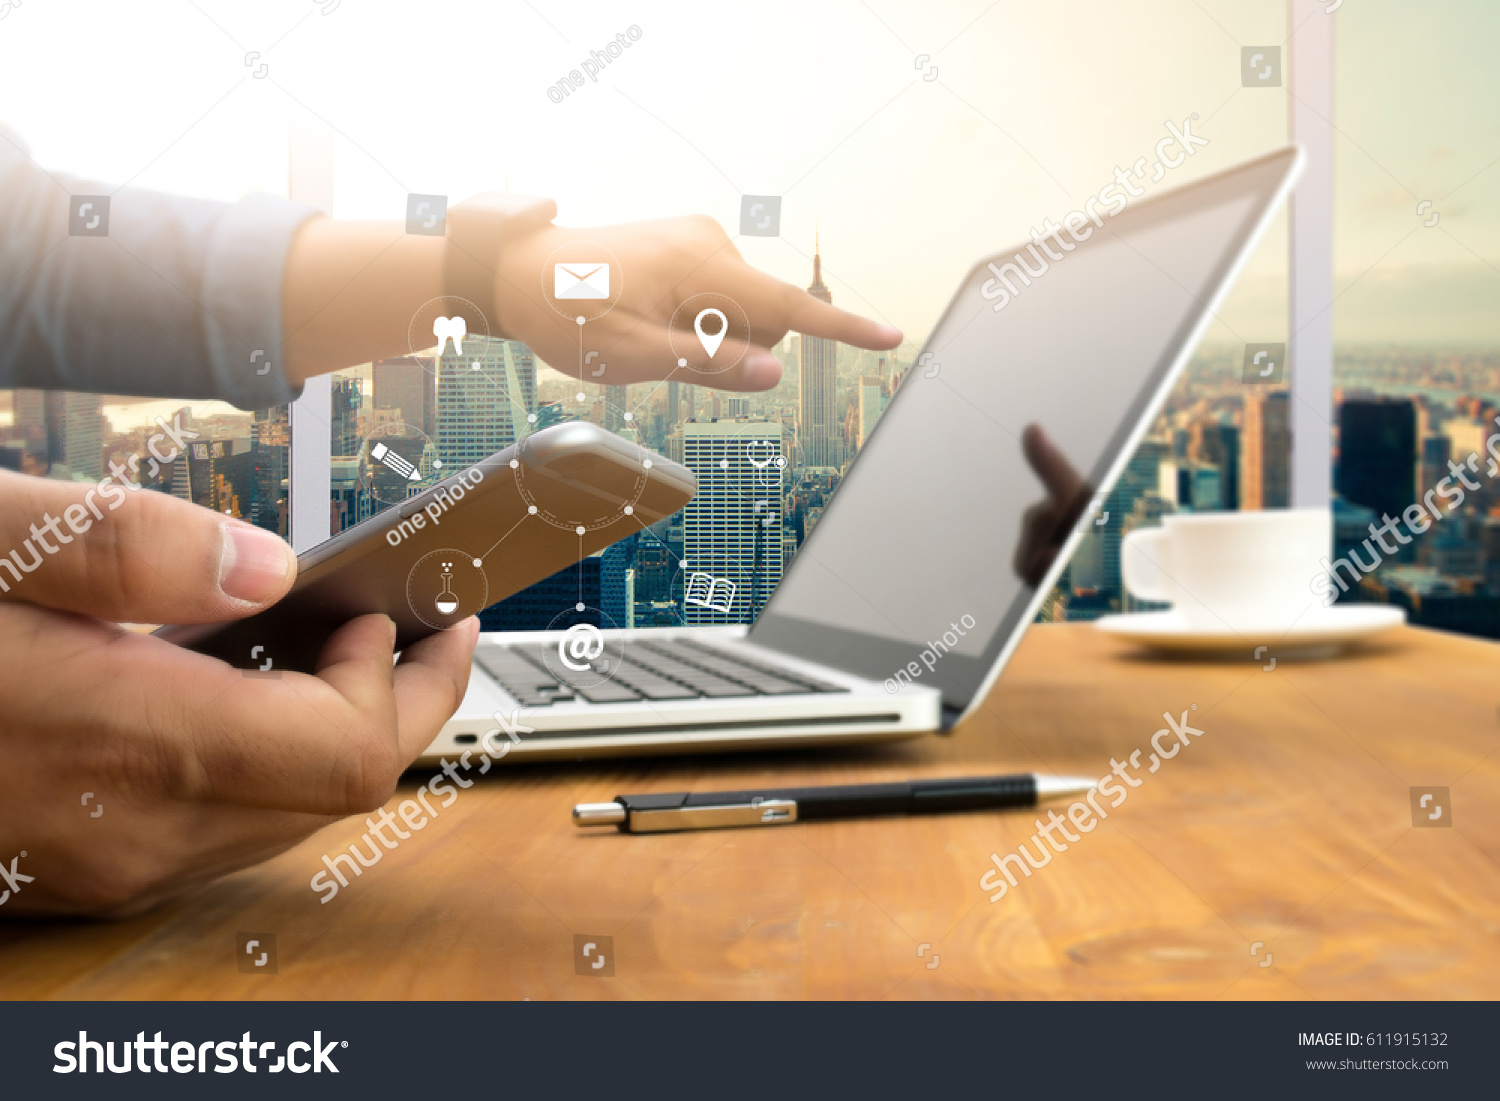 man hand holding smartphone device and  technology , businessman working with modern devices, digital tablet computer and mobile phone. #611915132